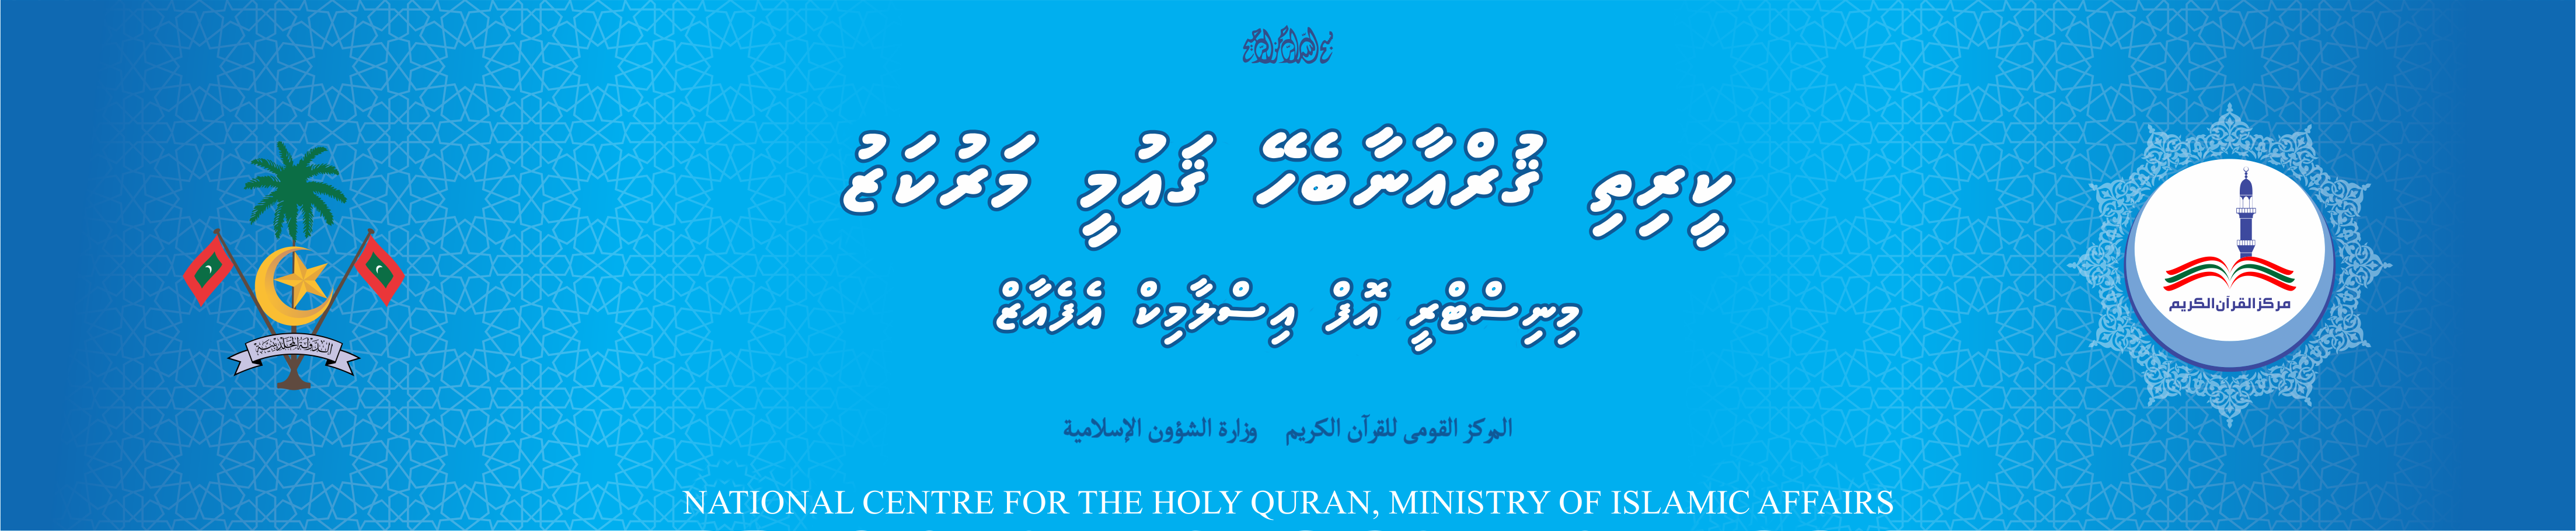 National Centre for the Holy Quran